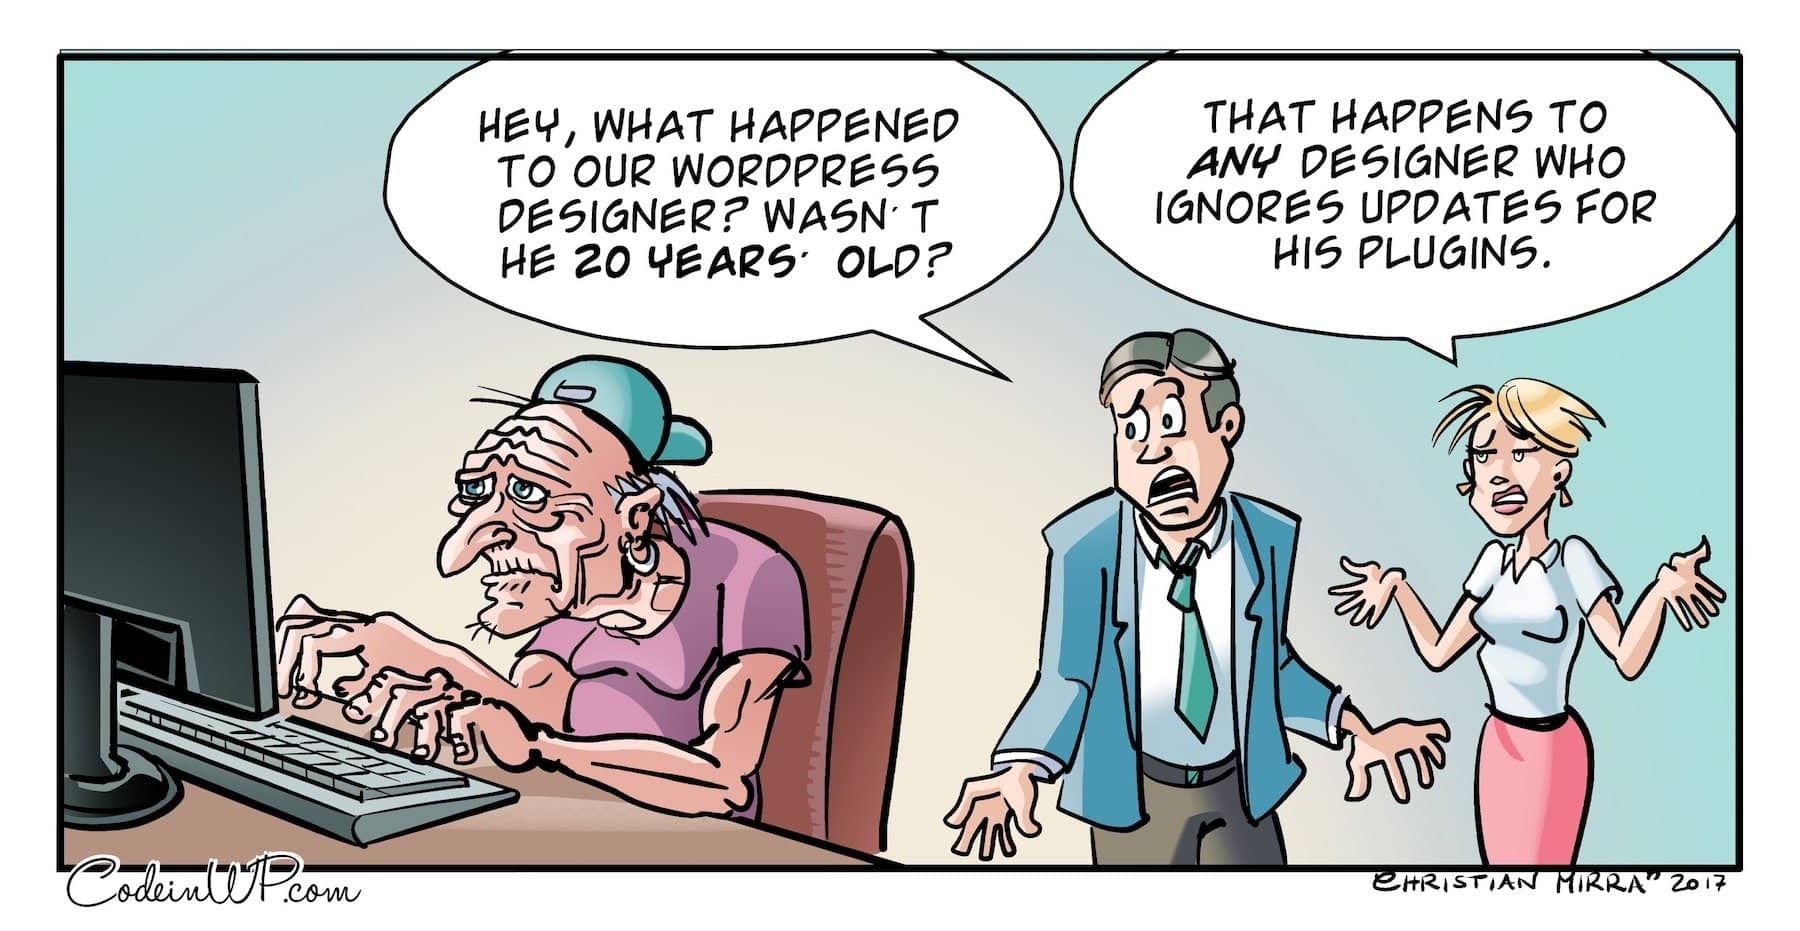 WordPress jokes about the stress of working with outdated tech